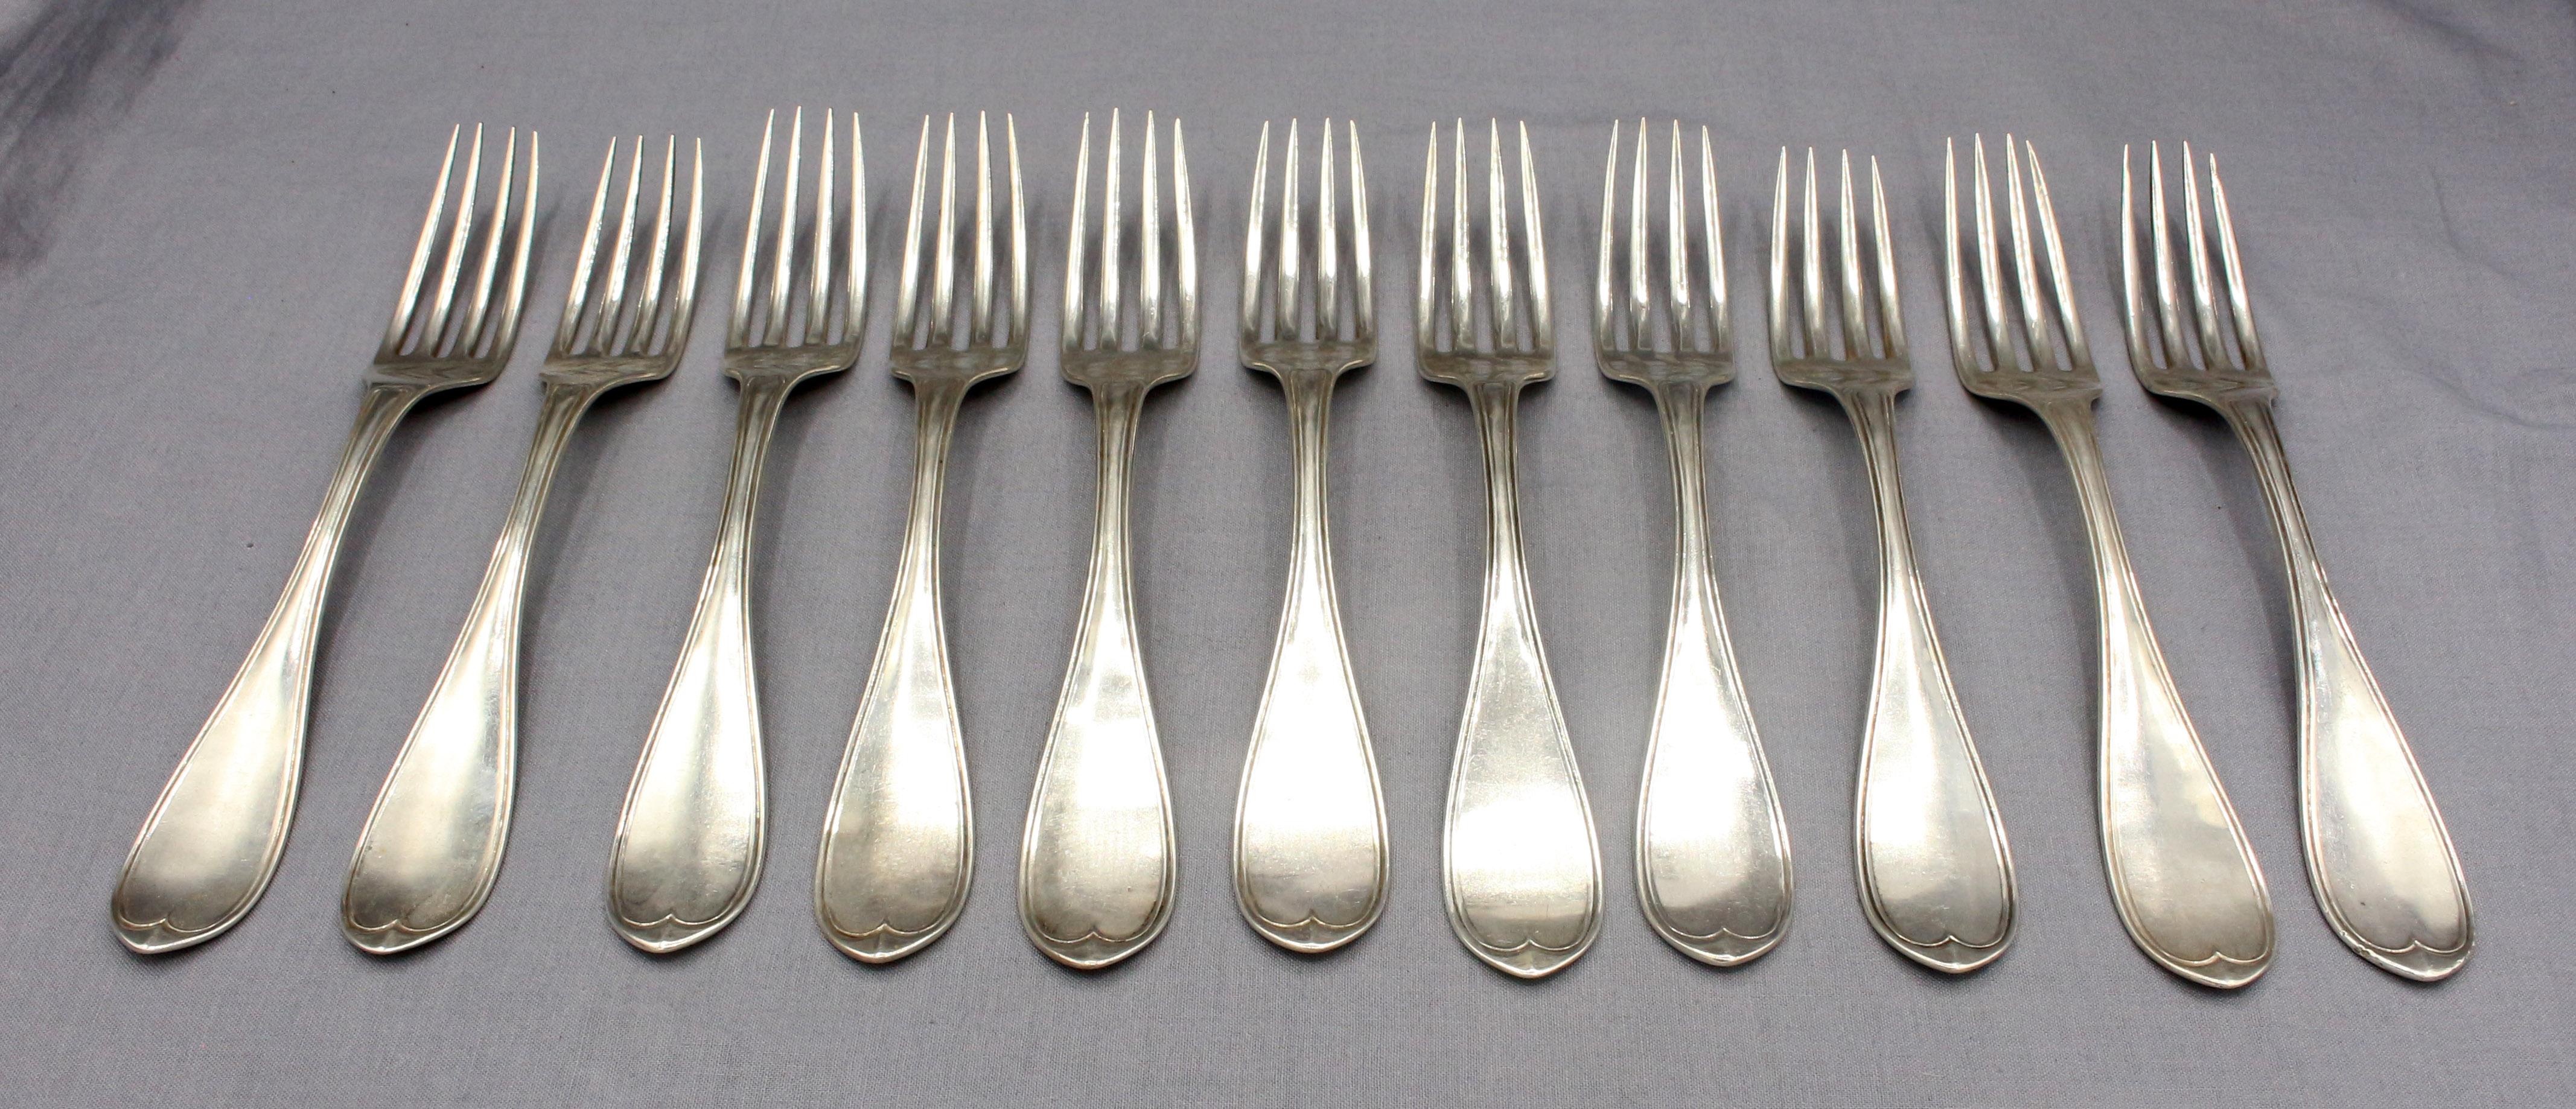 c.1850 Set of 11 coin silver dinner forks, Wood & Hughes, NY, NY. Pointed thread pattern. Reverse monogram. 18.80 troy oz.
7 3/4